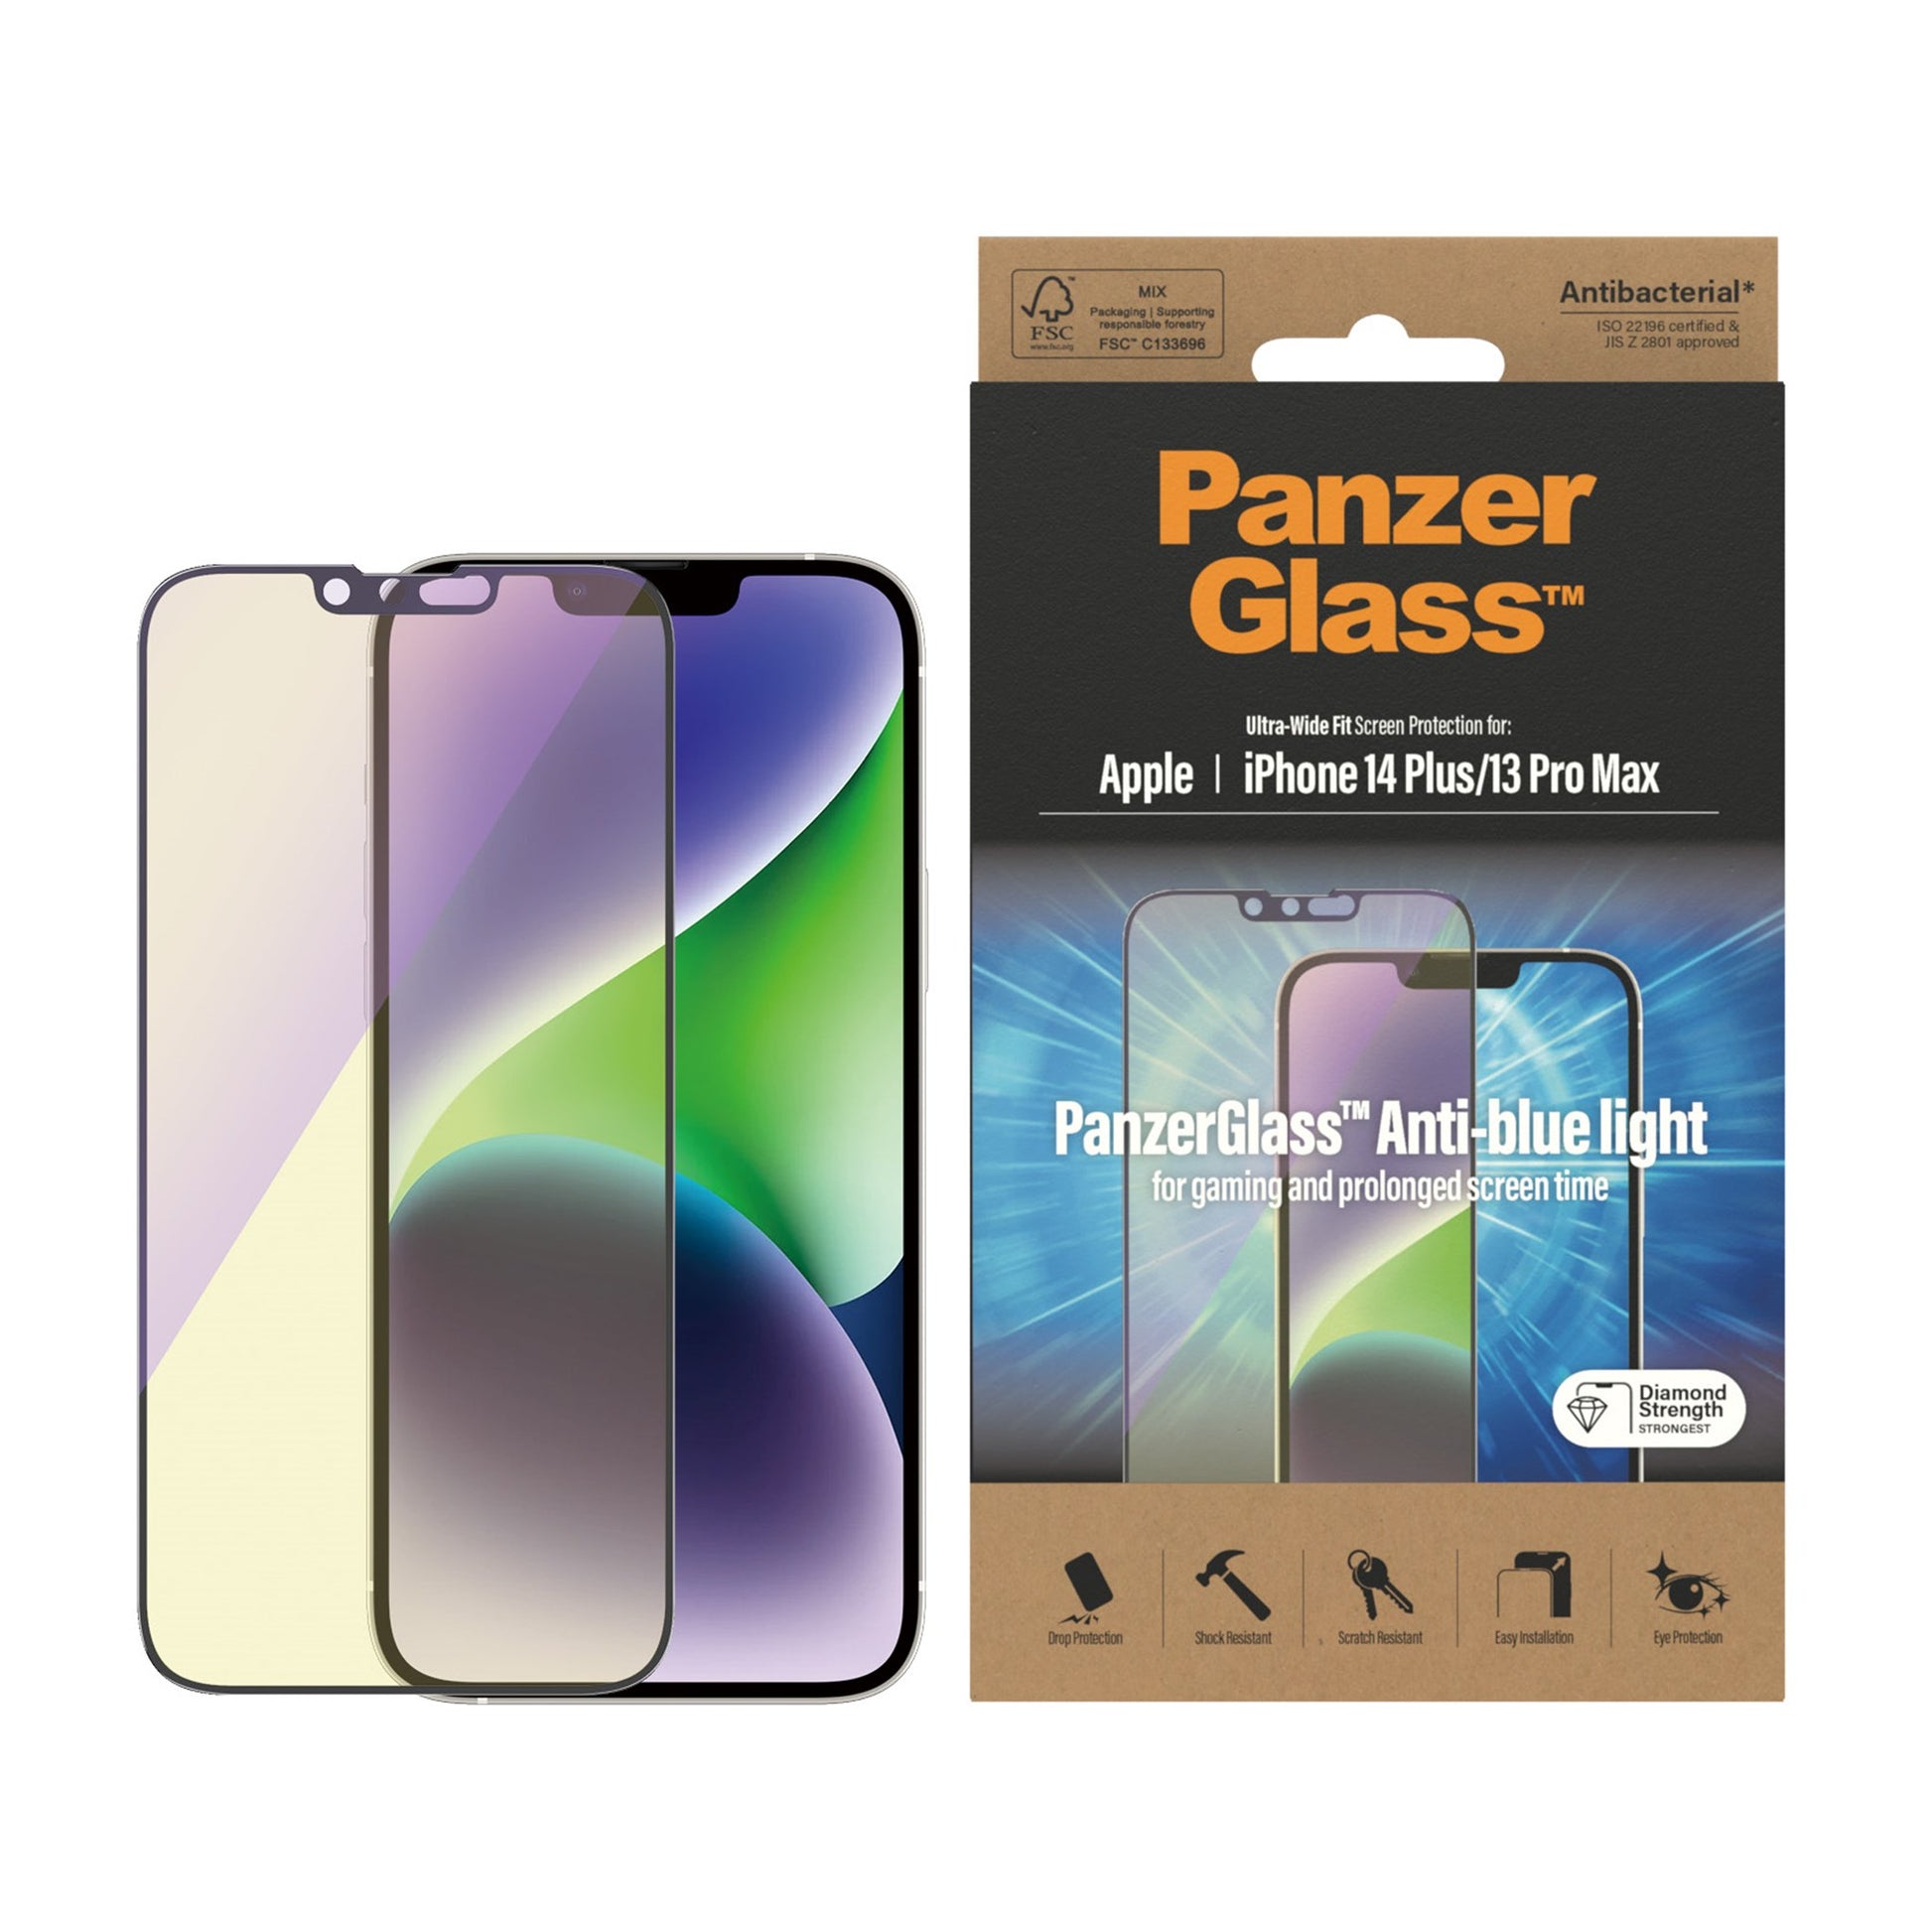 PanzerGlass™ Anti-blue light Screen Protector for Apple iPhone 14 Plus | 13 Pro Max | Ultra-Wide Fit 2